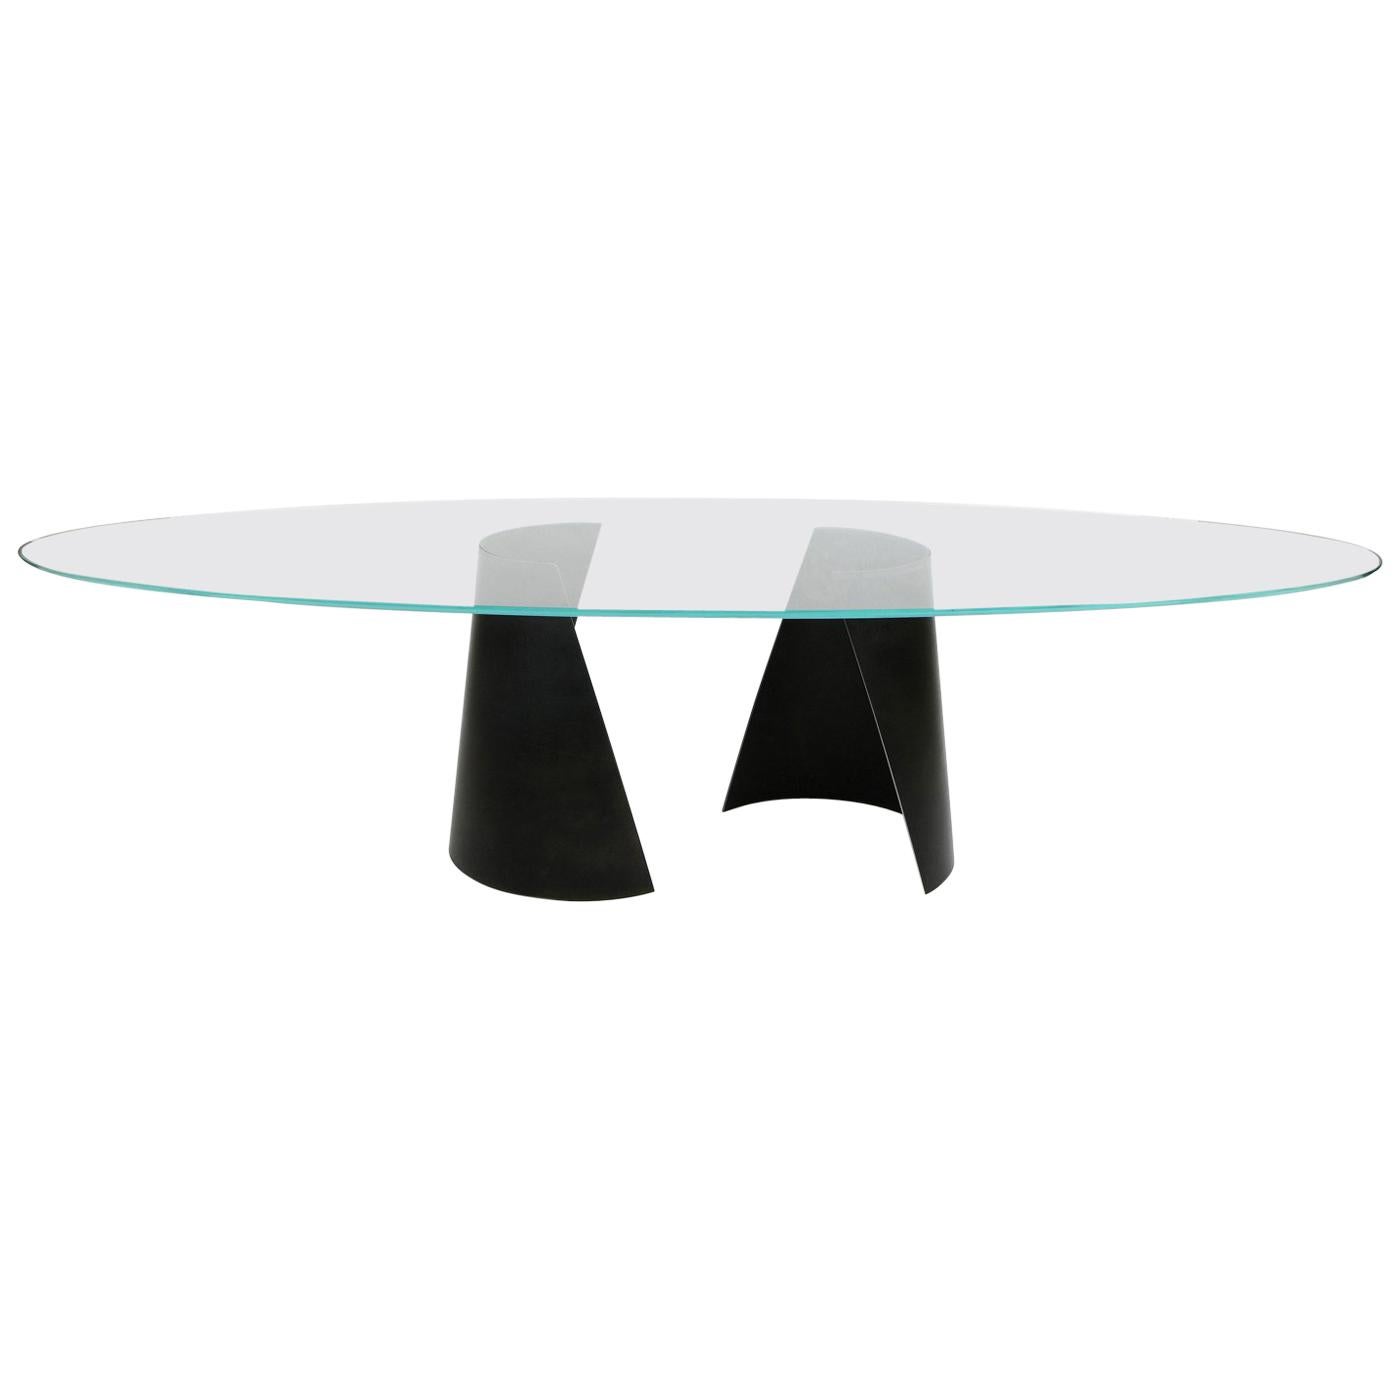 Serra - Table inspired by Richard Serra with glass top and steel base im Angebot